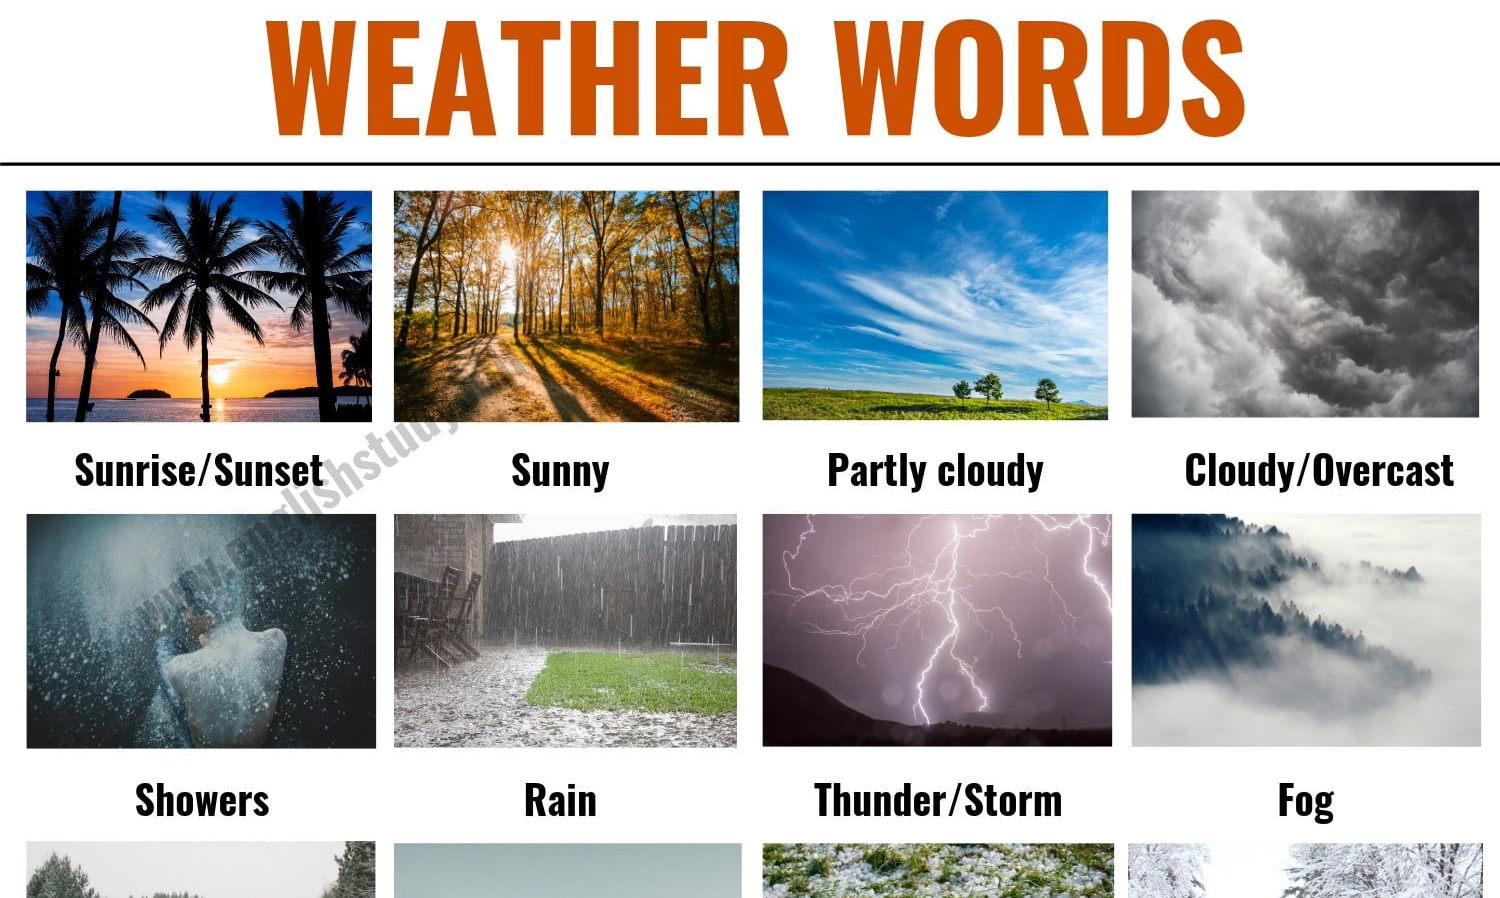 The weather should. Weather слова. Погода на английском. Weather in English. Describing weather in English.